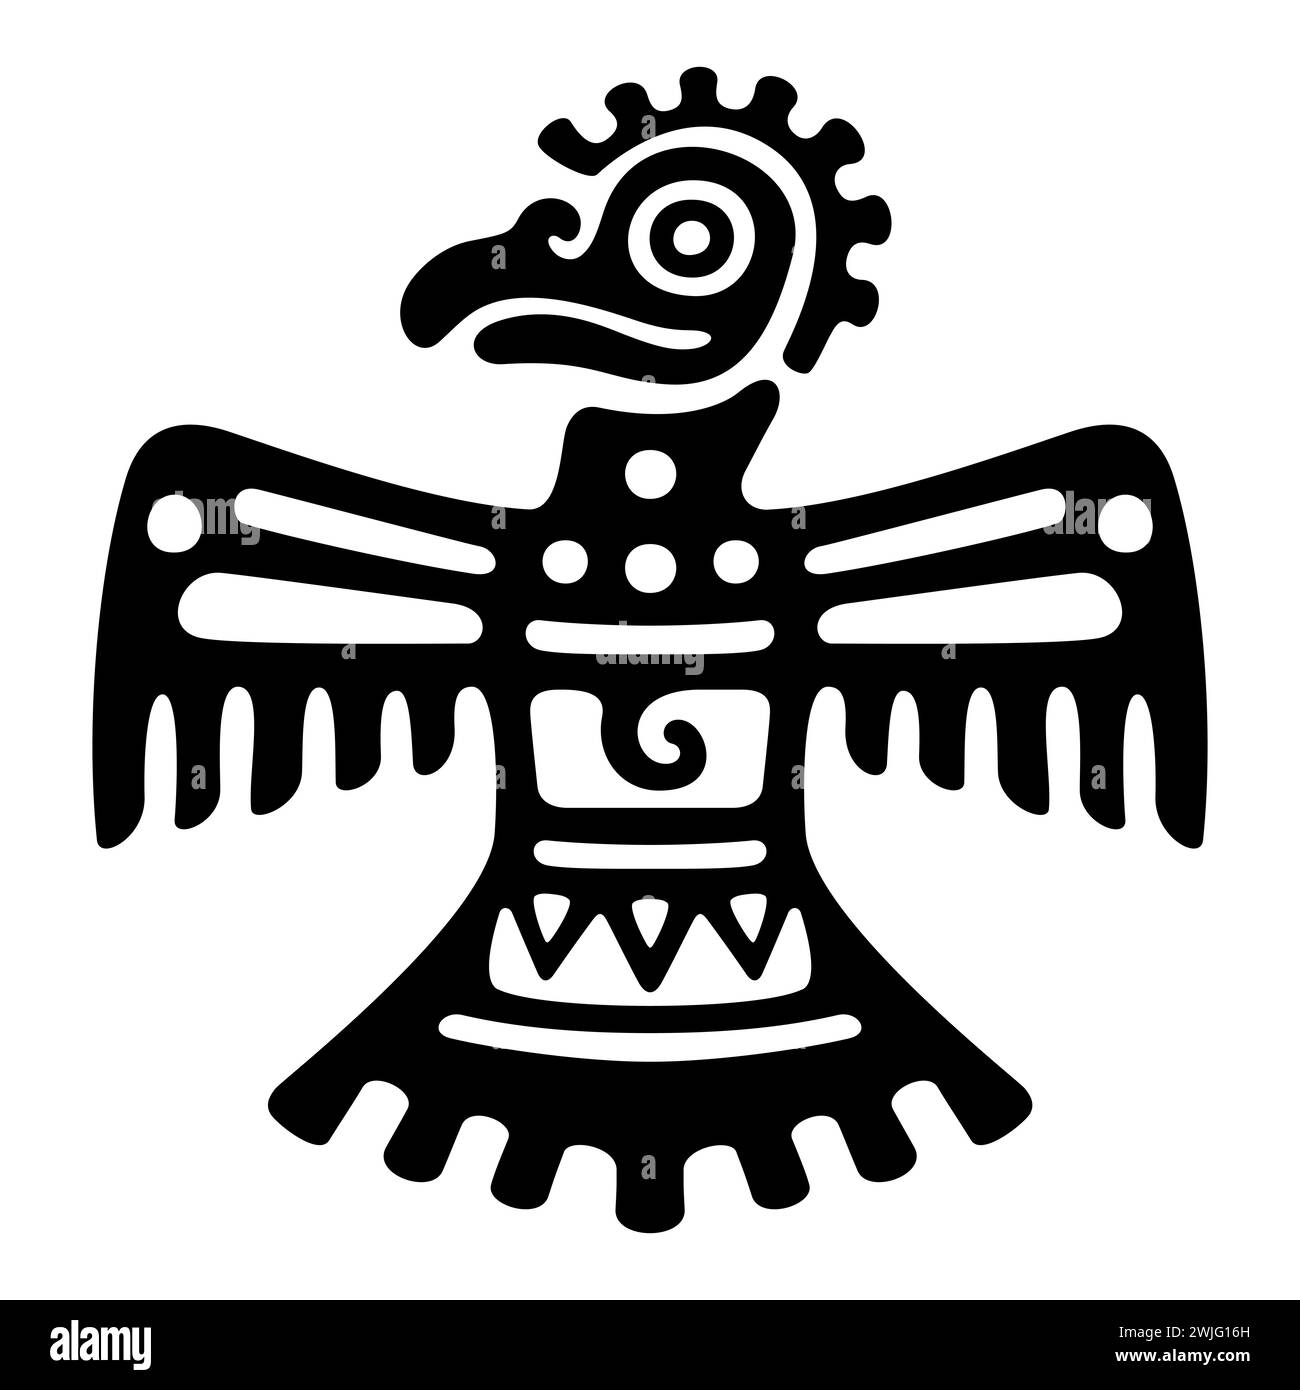 Roadrunner symbol of ancient Mexico. Decorative Aztec clay stamp motif showing a chaparral bird as it was found in pre-Columbian Veracruz. Stock Photo